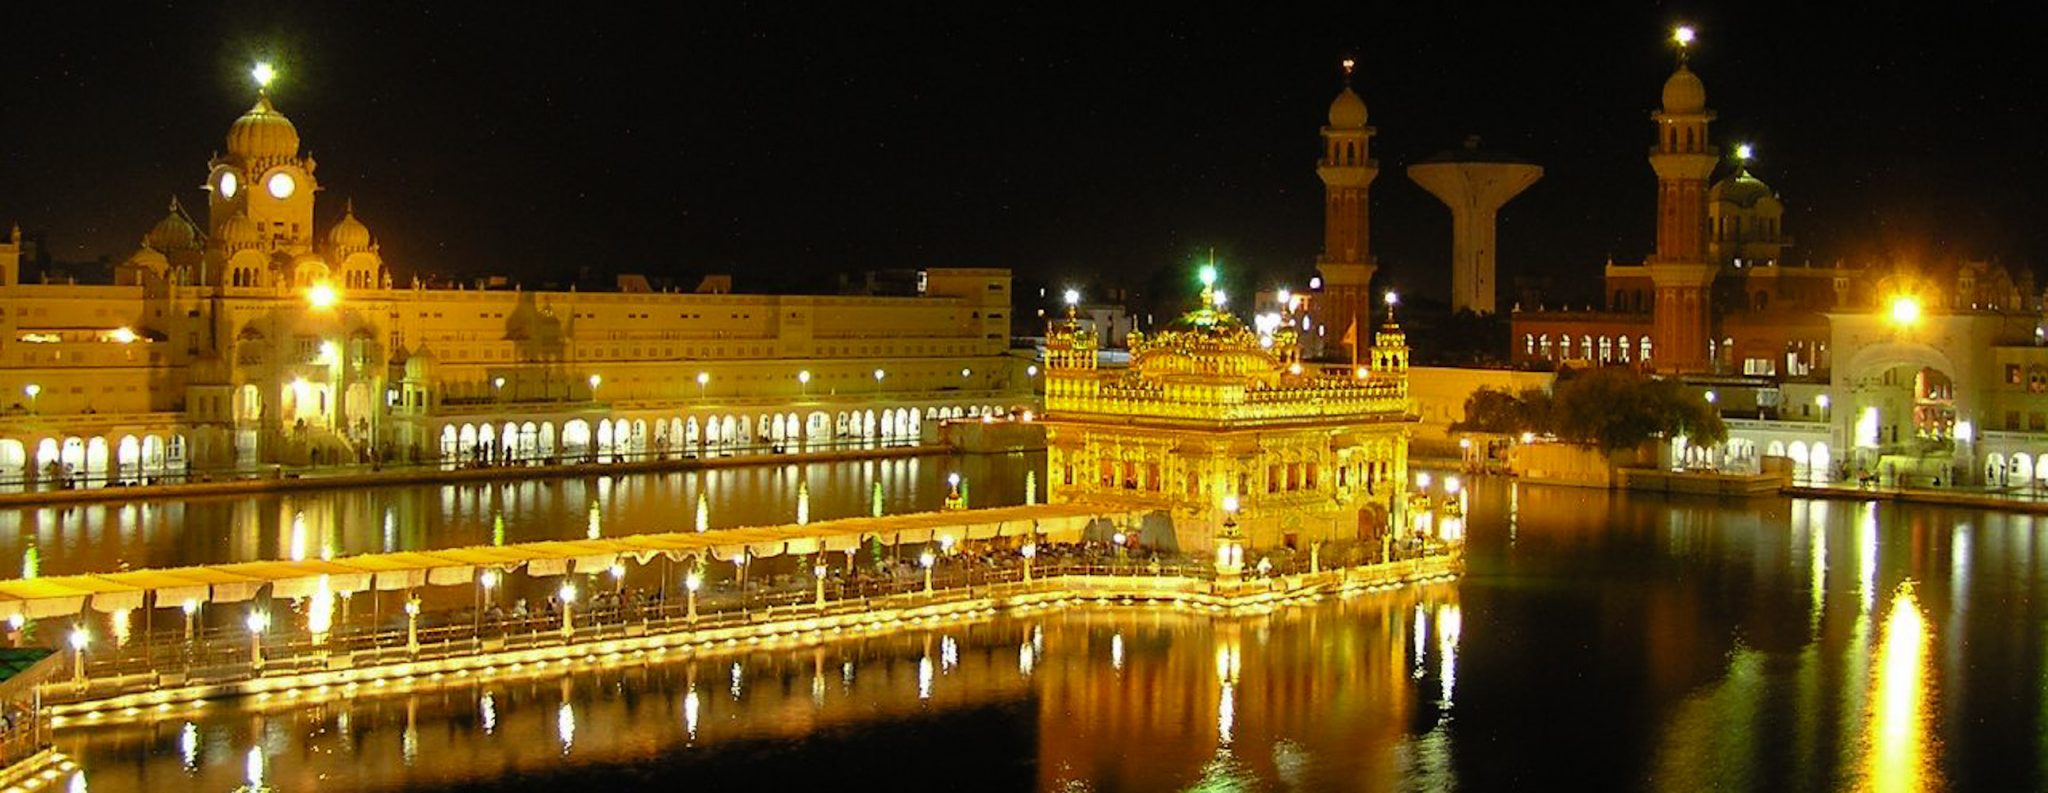 See Golden Temple in Amritsar Punjab